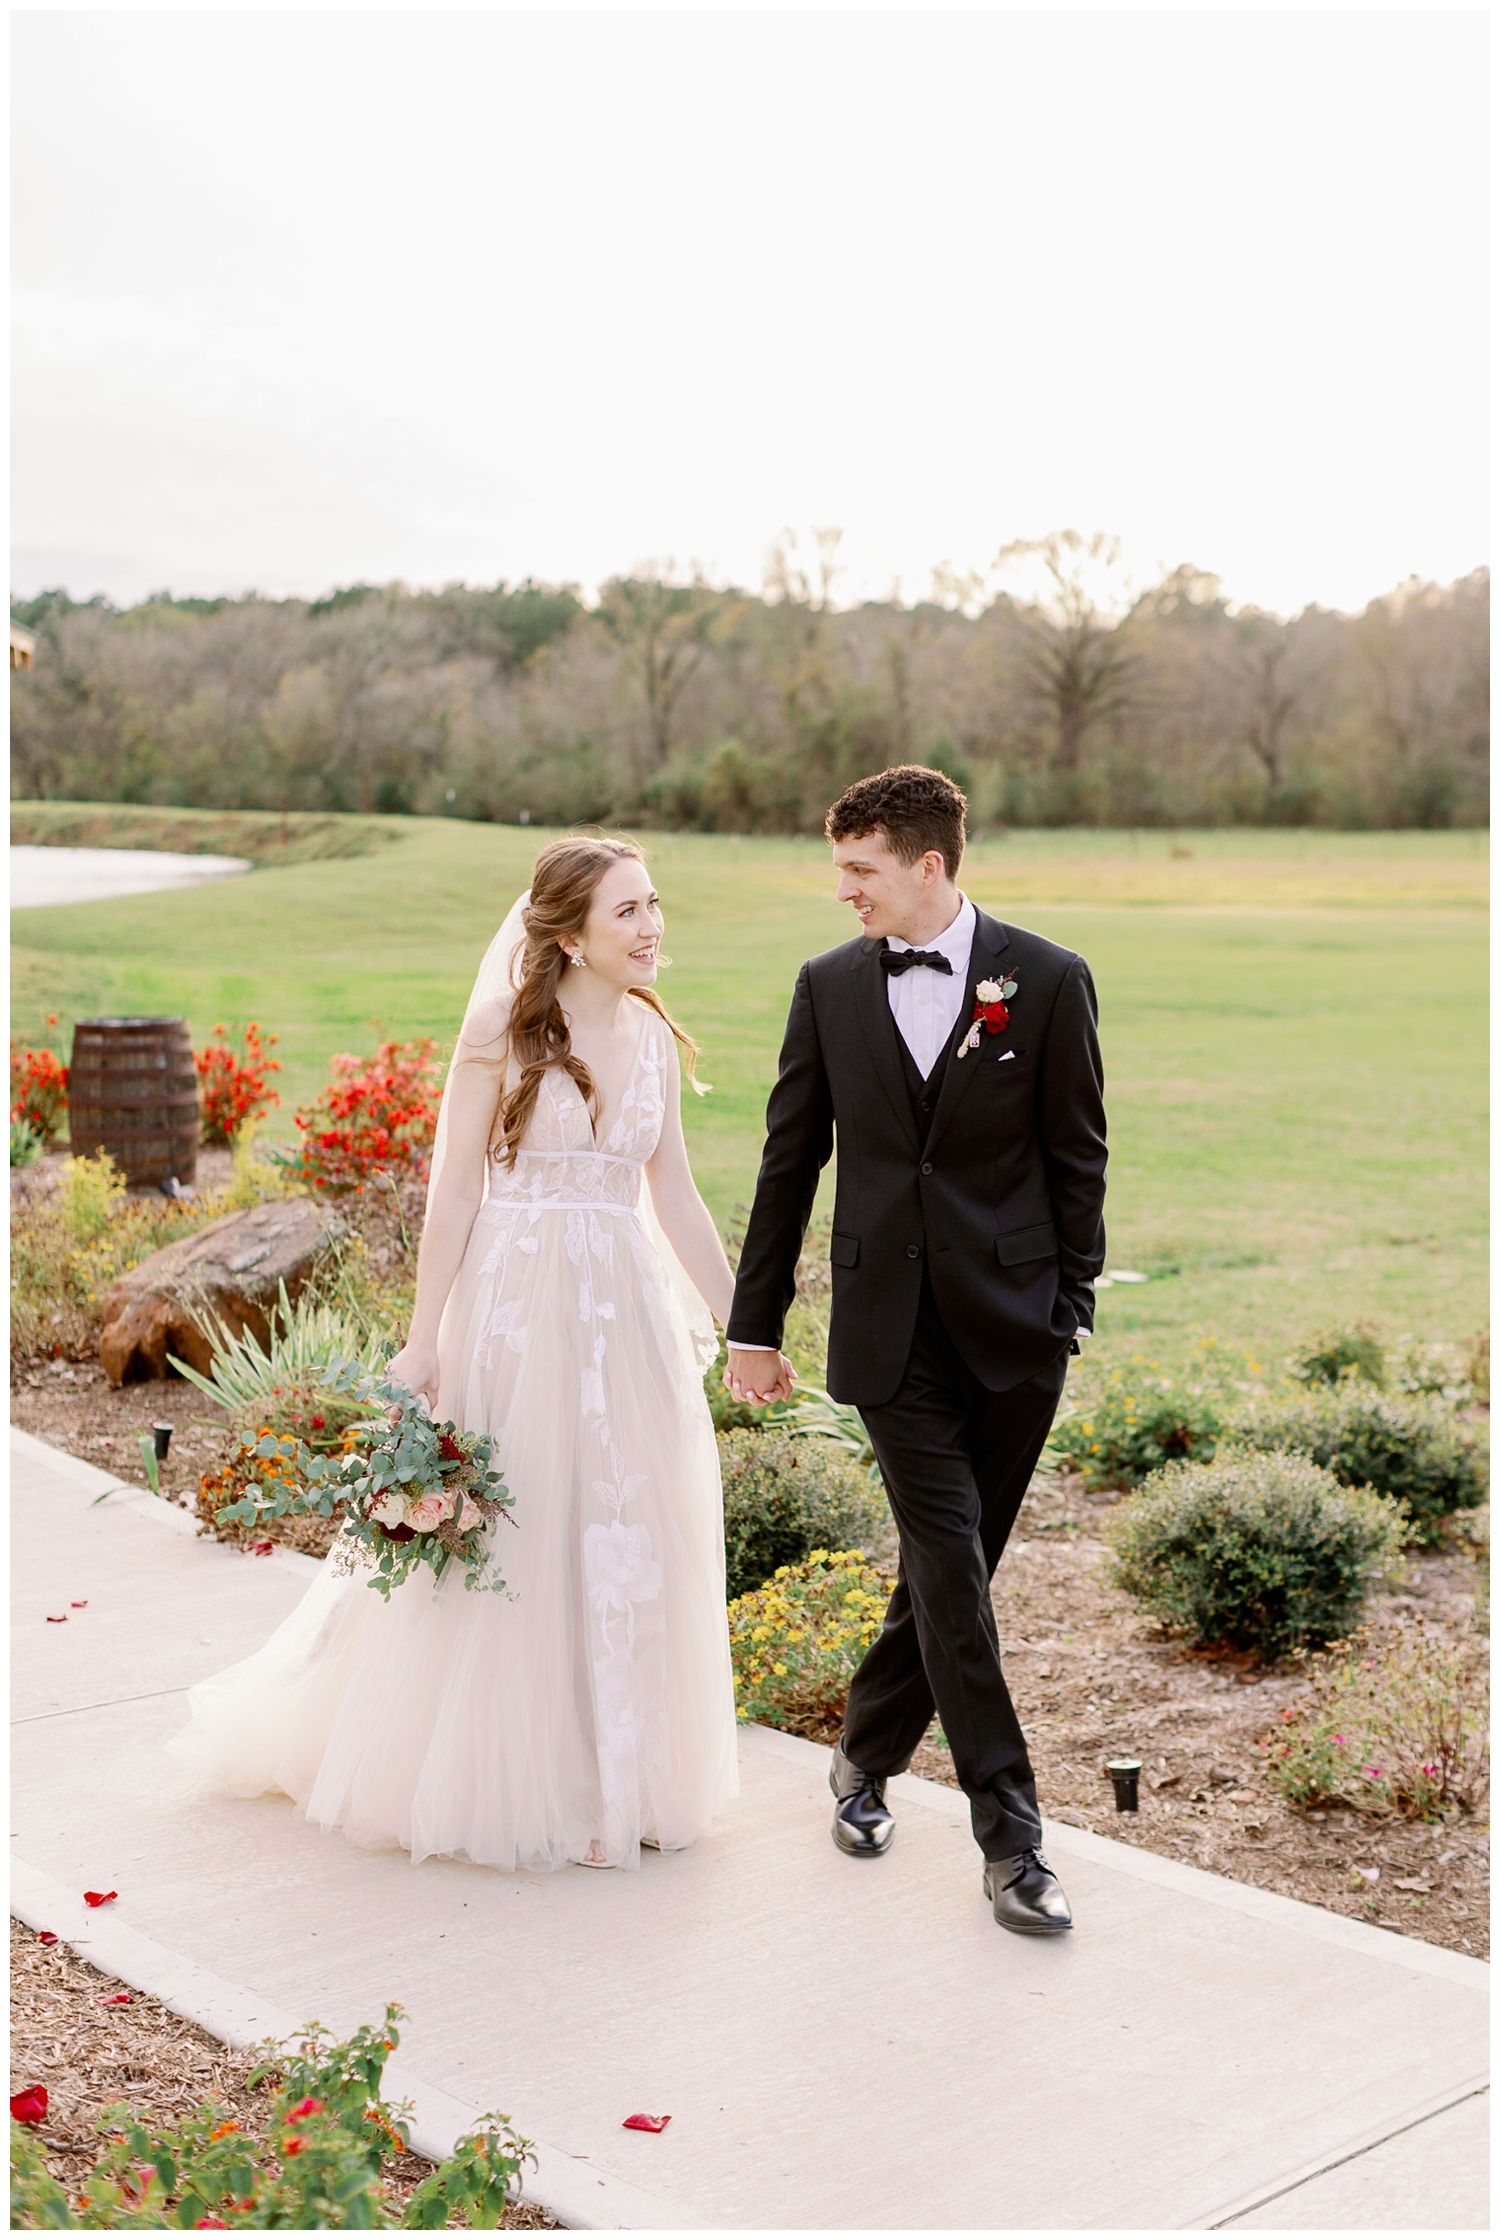 Union Ranch wedding with bride and groom holding hands walking